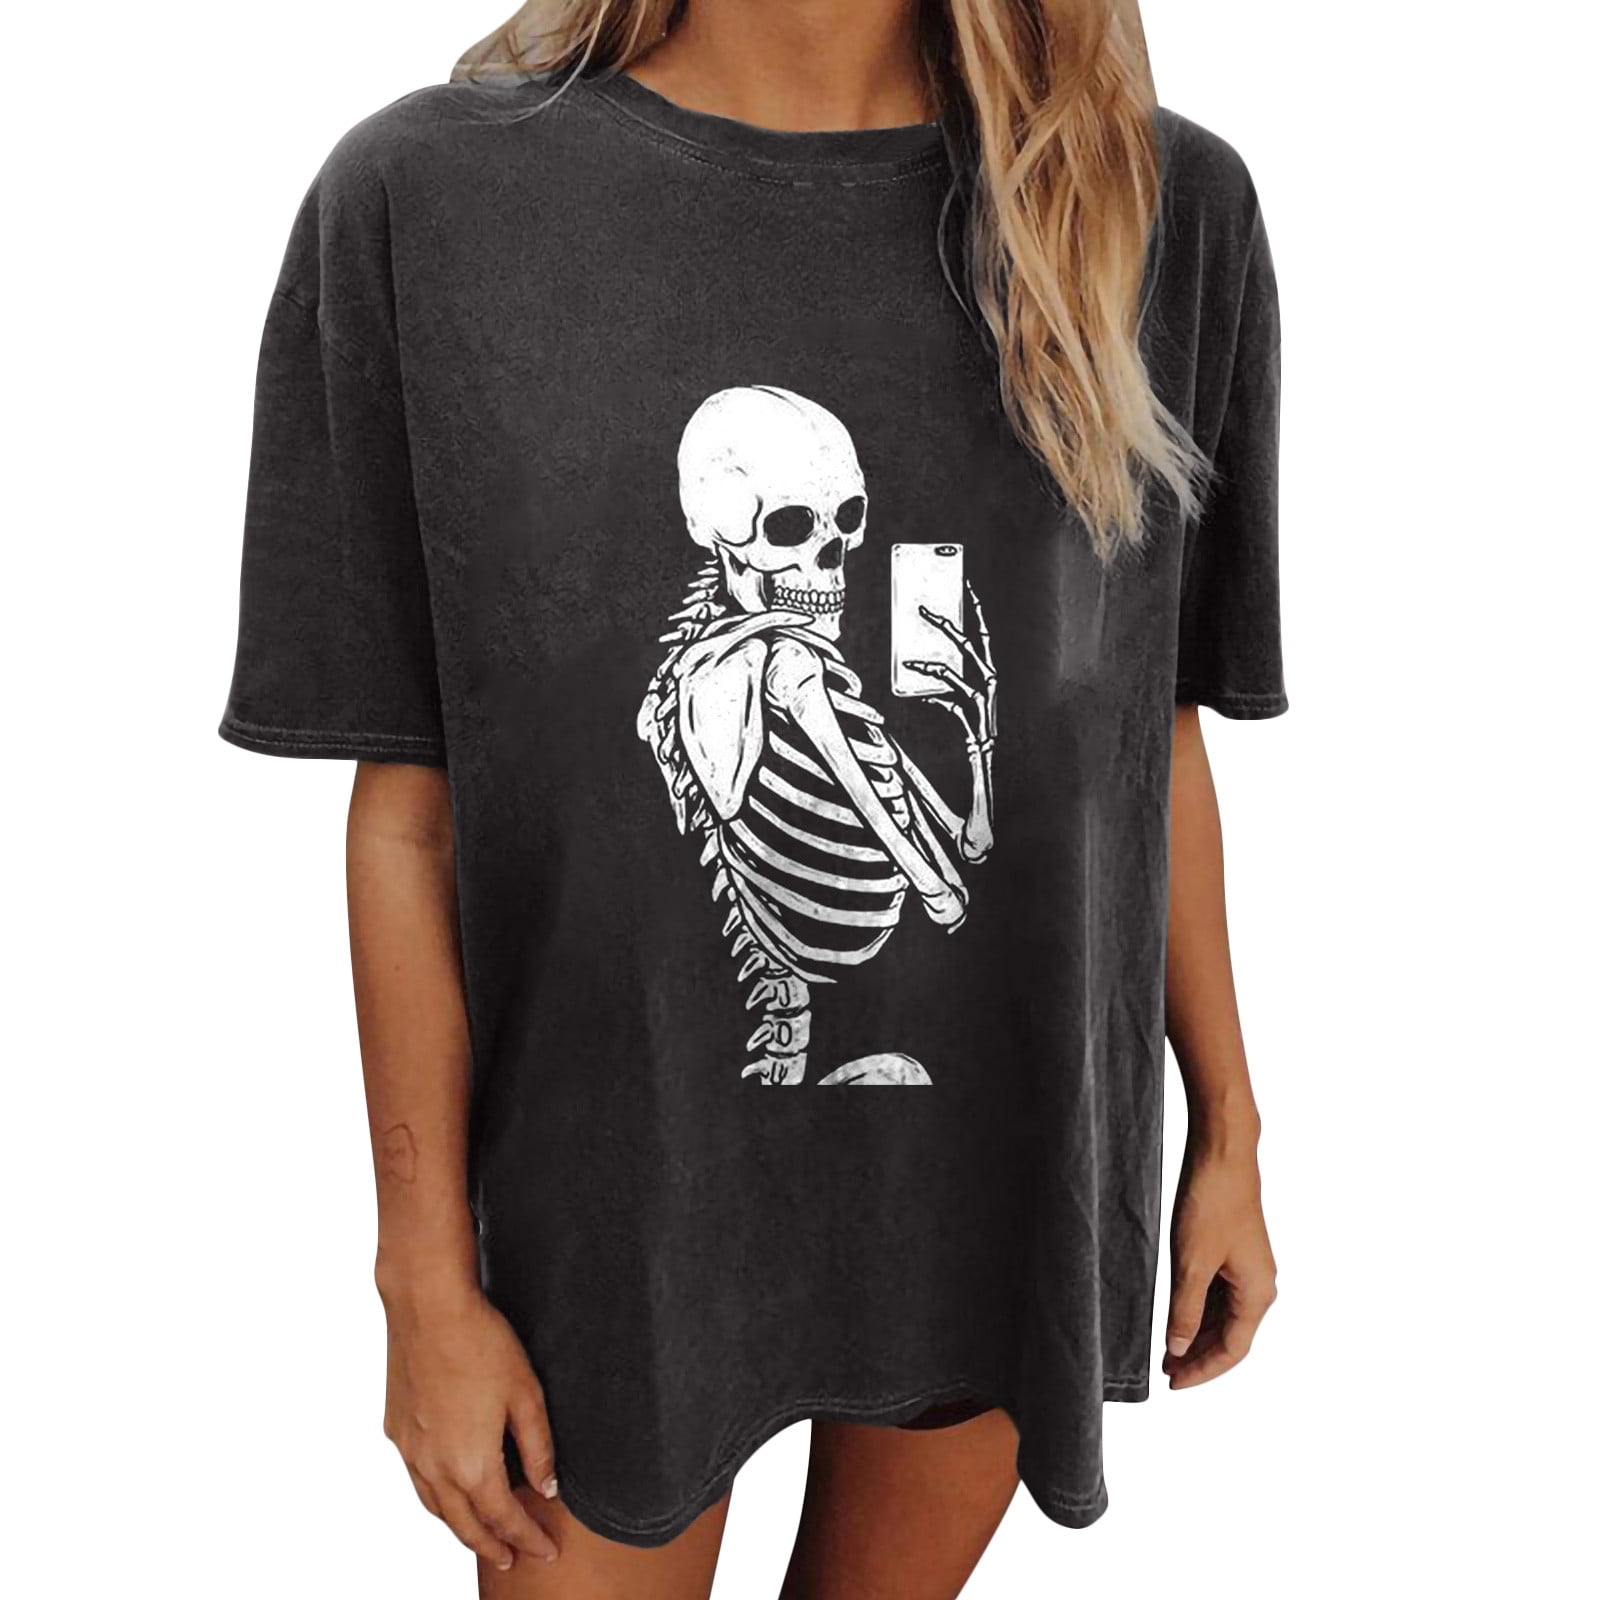 Skeleton Anime Print T Shirt Short Sleeve Loose Blouse Vintage Pullover Shirts Y2K Romantic Rock Top Blusas de Verano para Mujer 2022 Summer Tops Blouse for Women Casual Shirts -